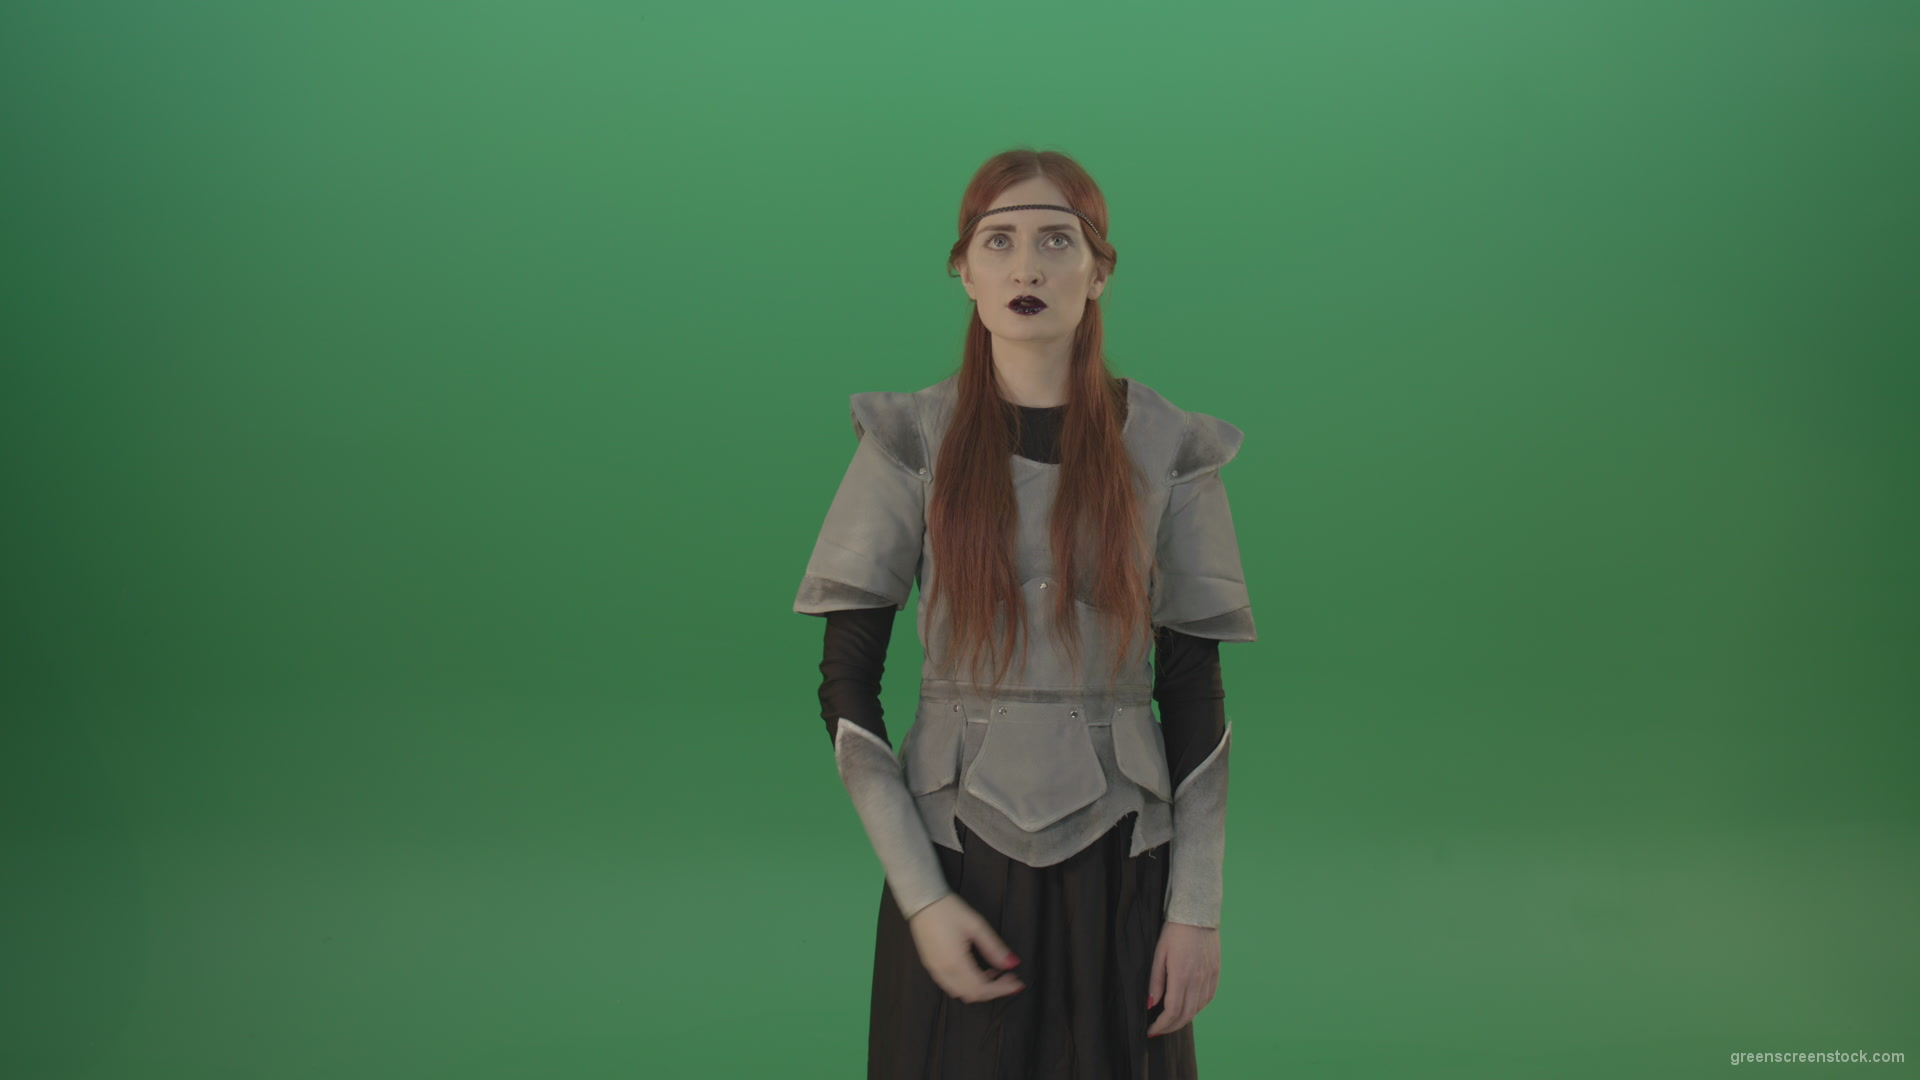 Actress-red-hair-girl-in-a-medieval-war-dress-crosses-praying-to-God-on-green-screen_008 Green Screen Stock